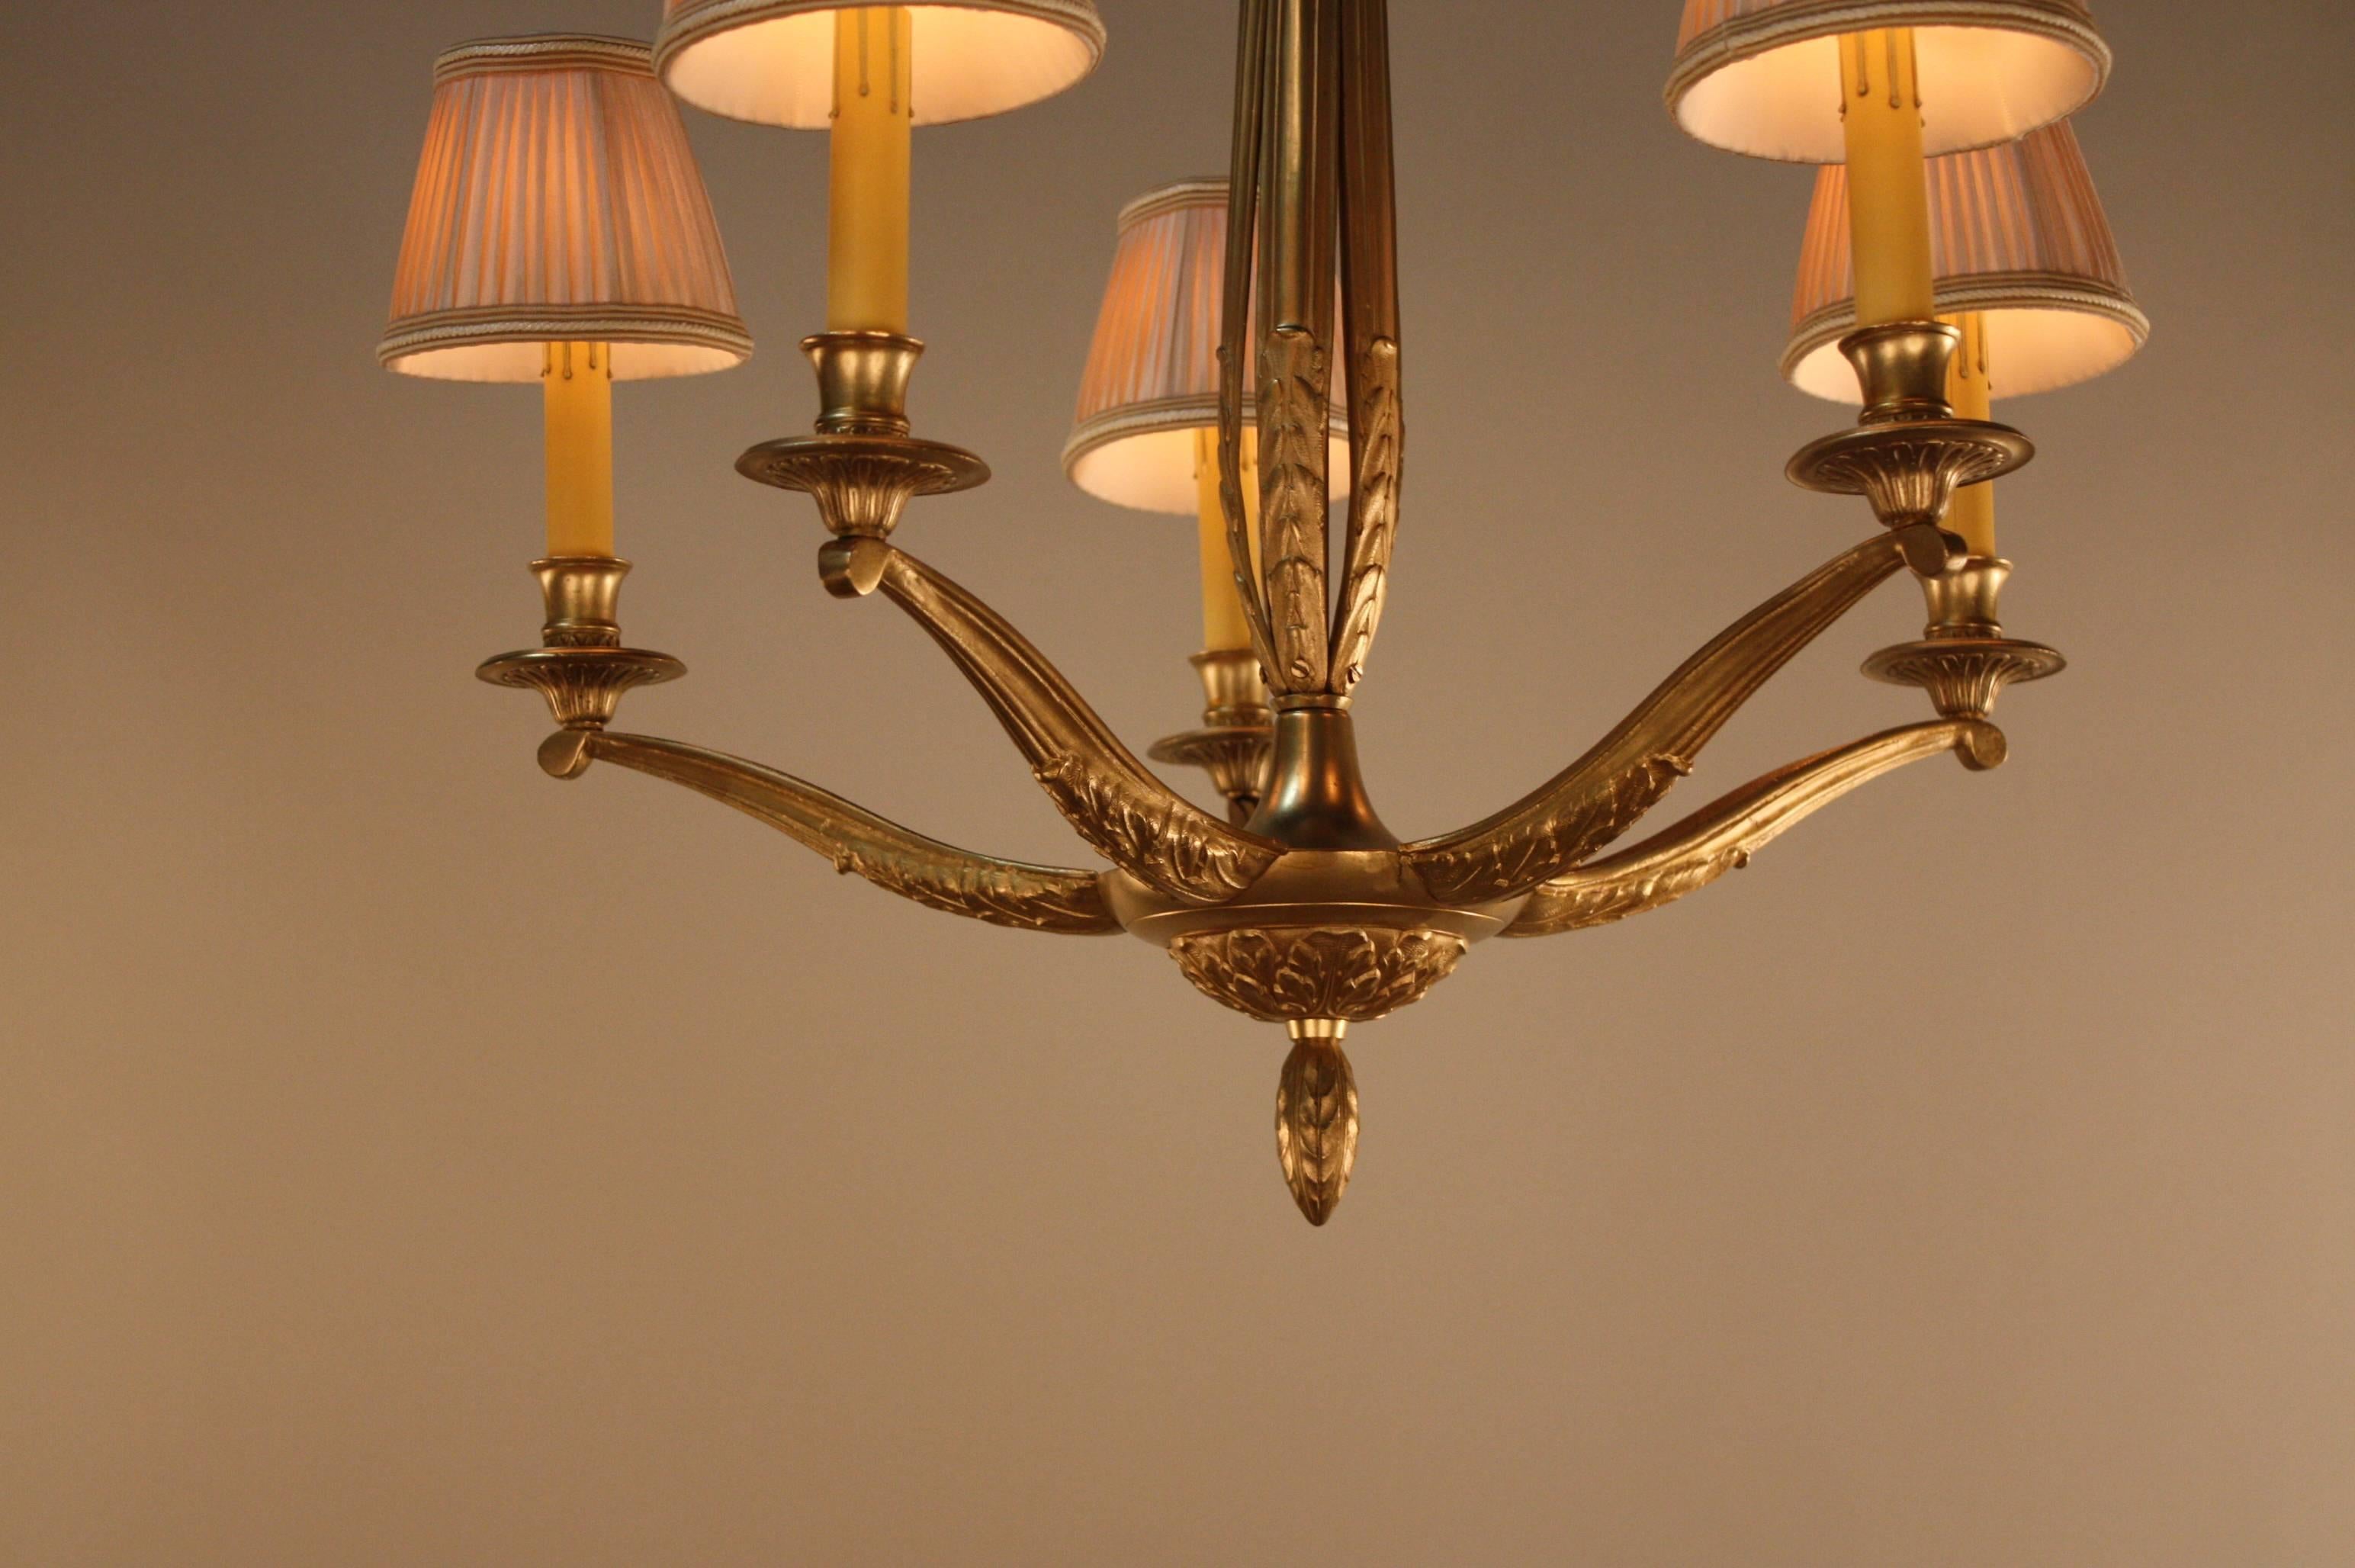 An elegant five-light French bronze chandelier. This golden bronze artisan chandelier represent quality and workmanship of 1930s area.
This chandelier has 28